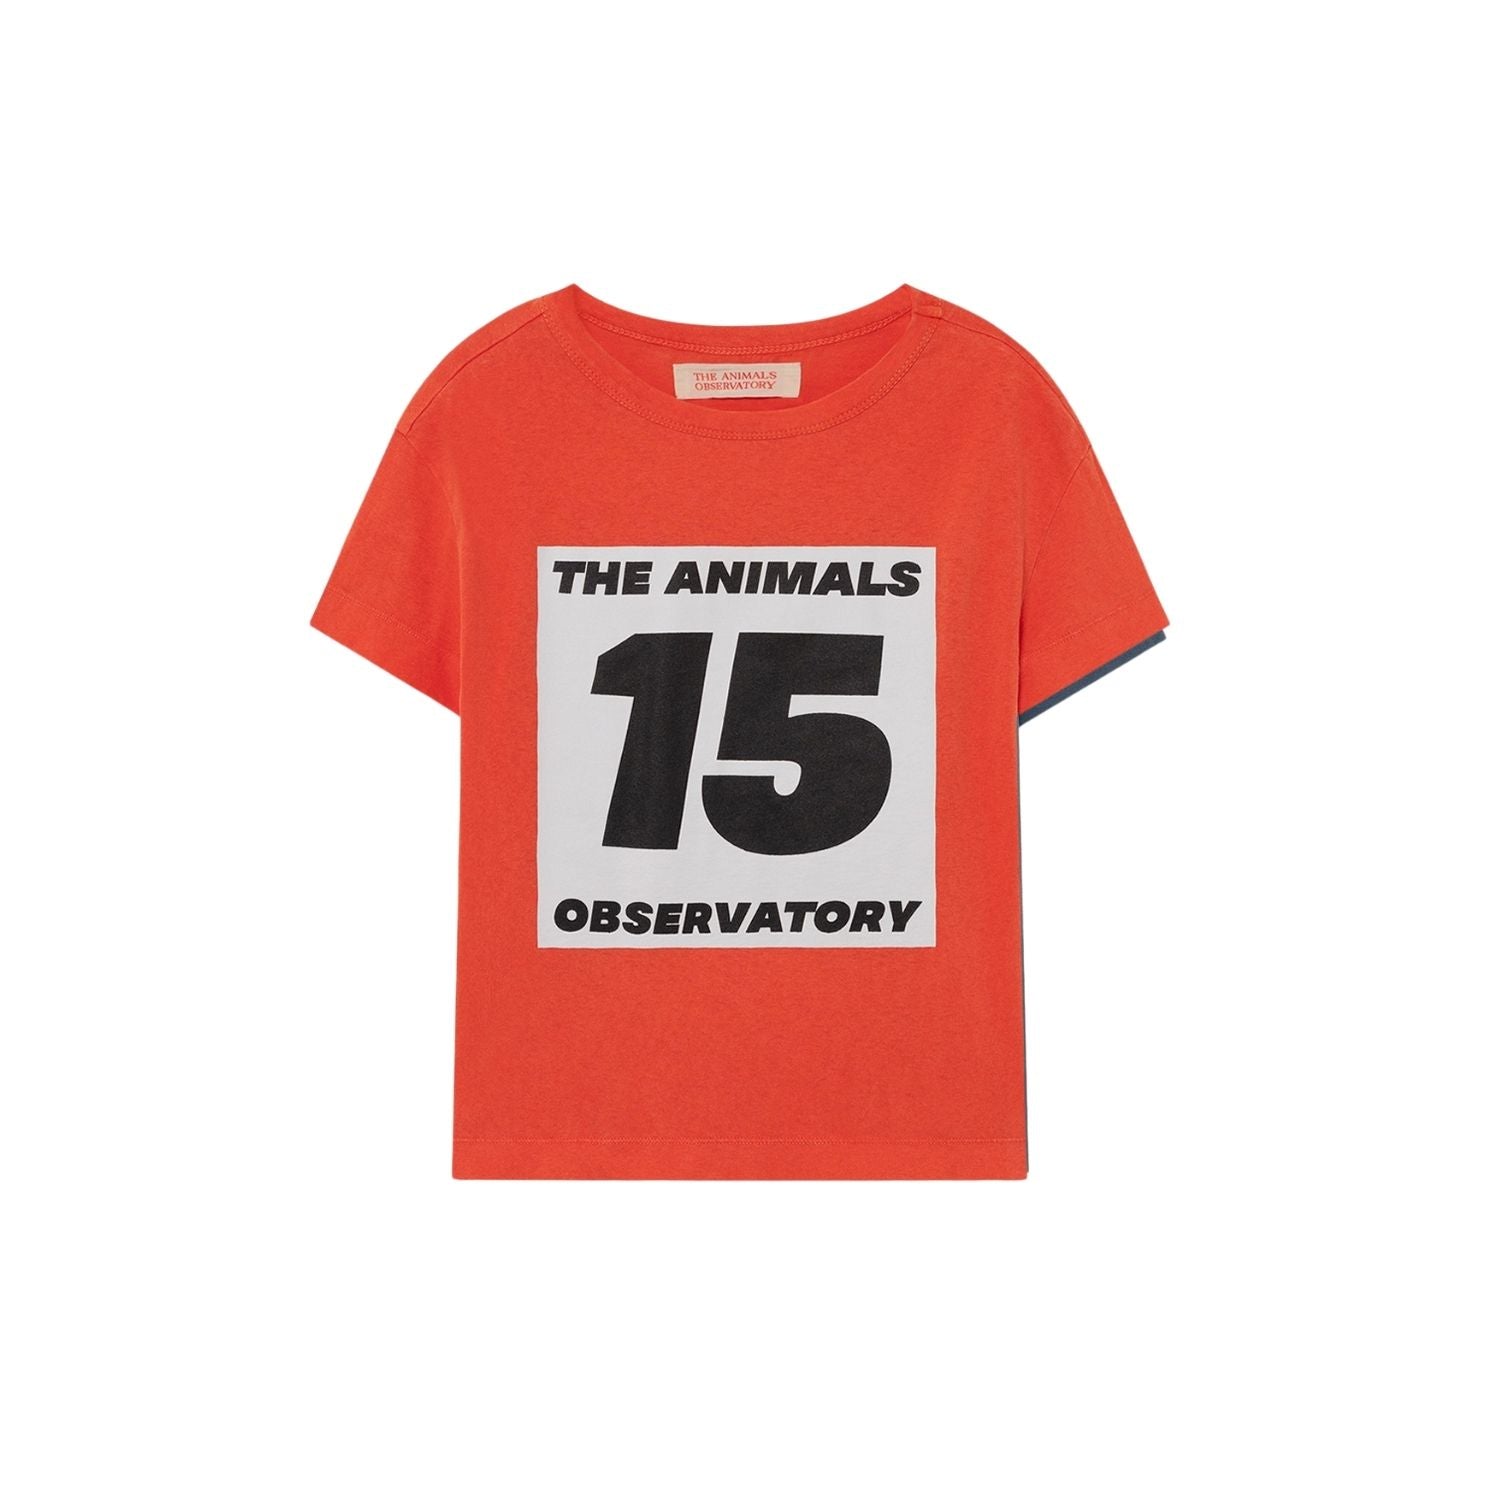 Rooster kids+ t-shirt red 15 Tops The Animals Observatory 